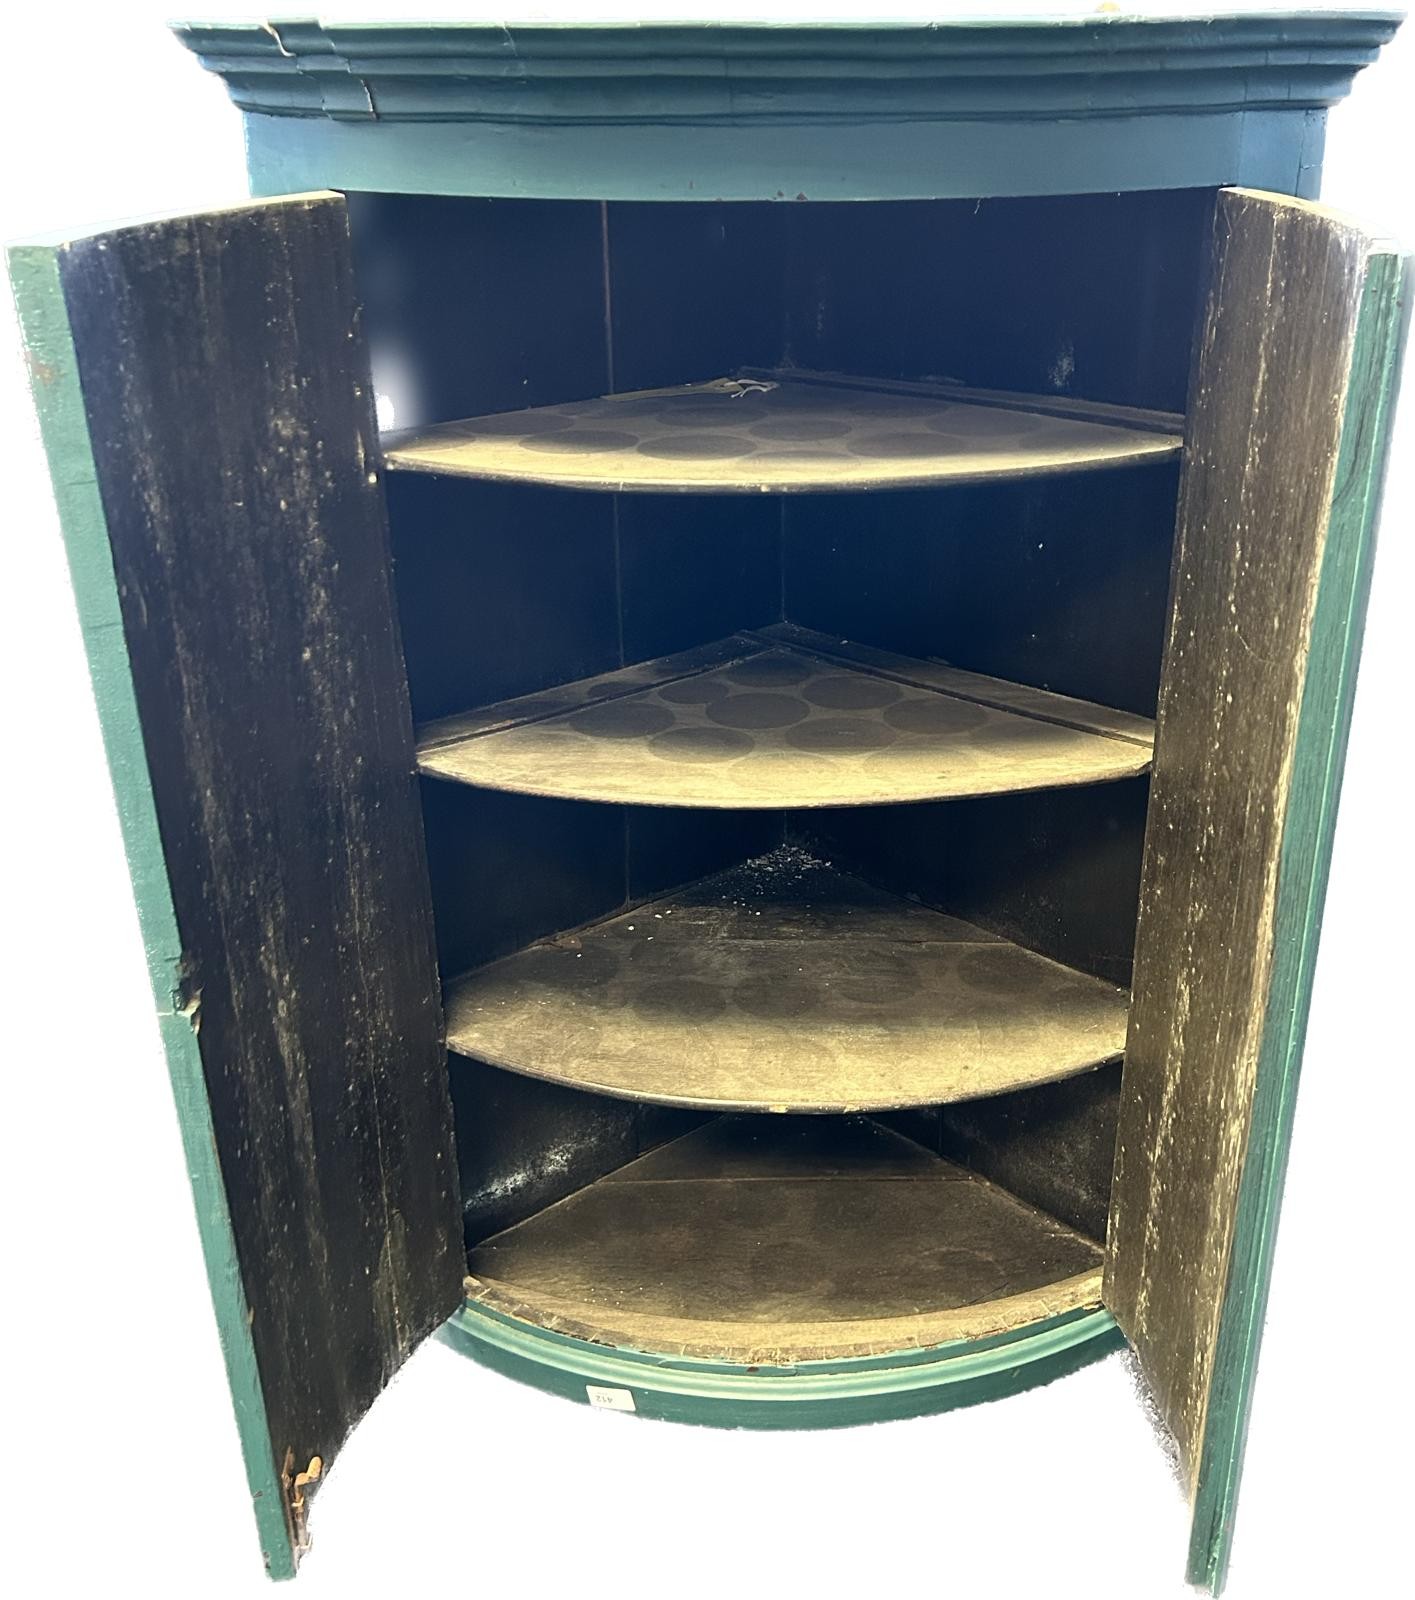 19th Century painted corner cabinet with interior shelving - Image 2 of 3